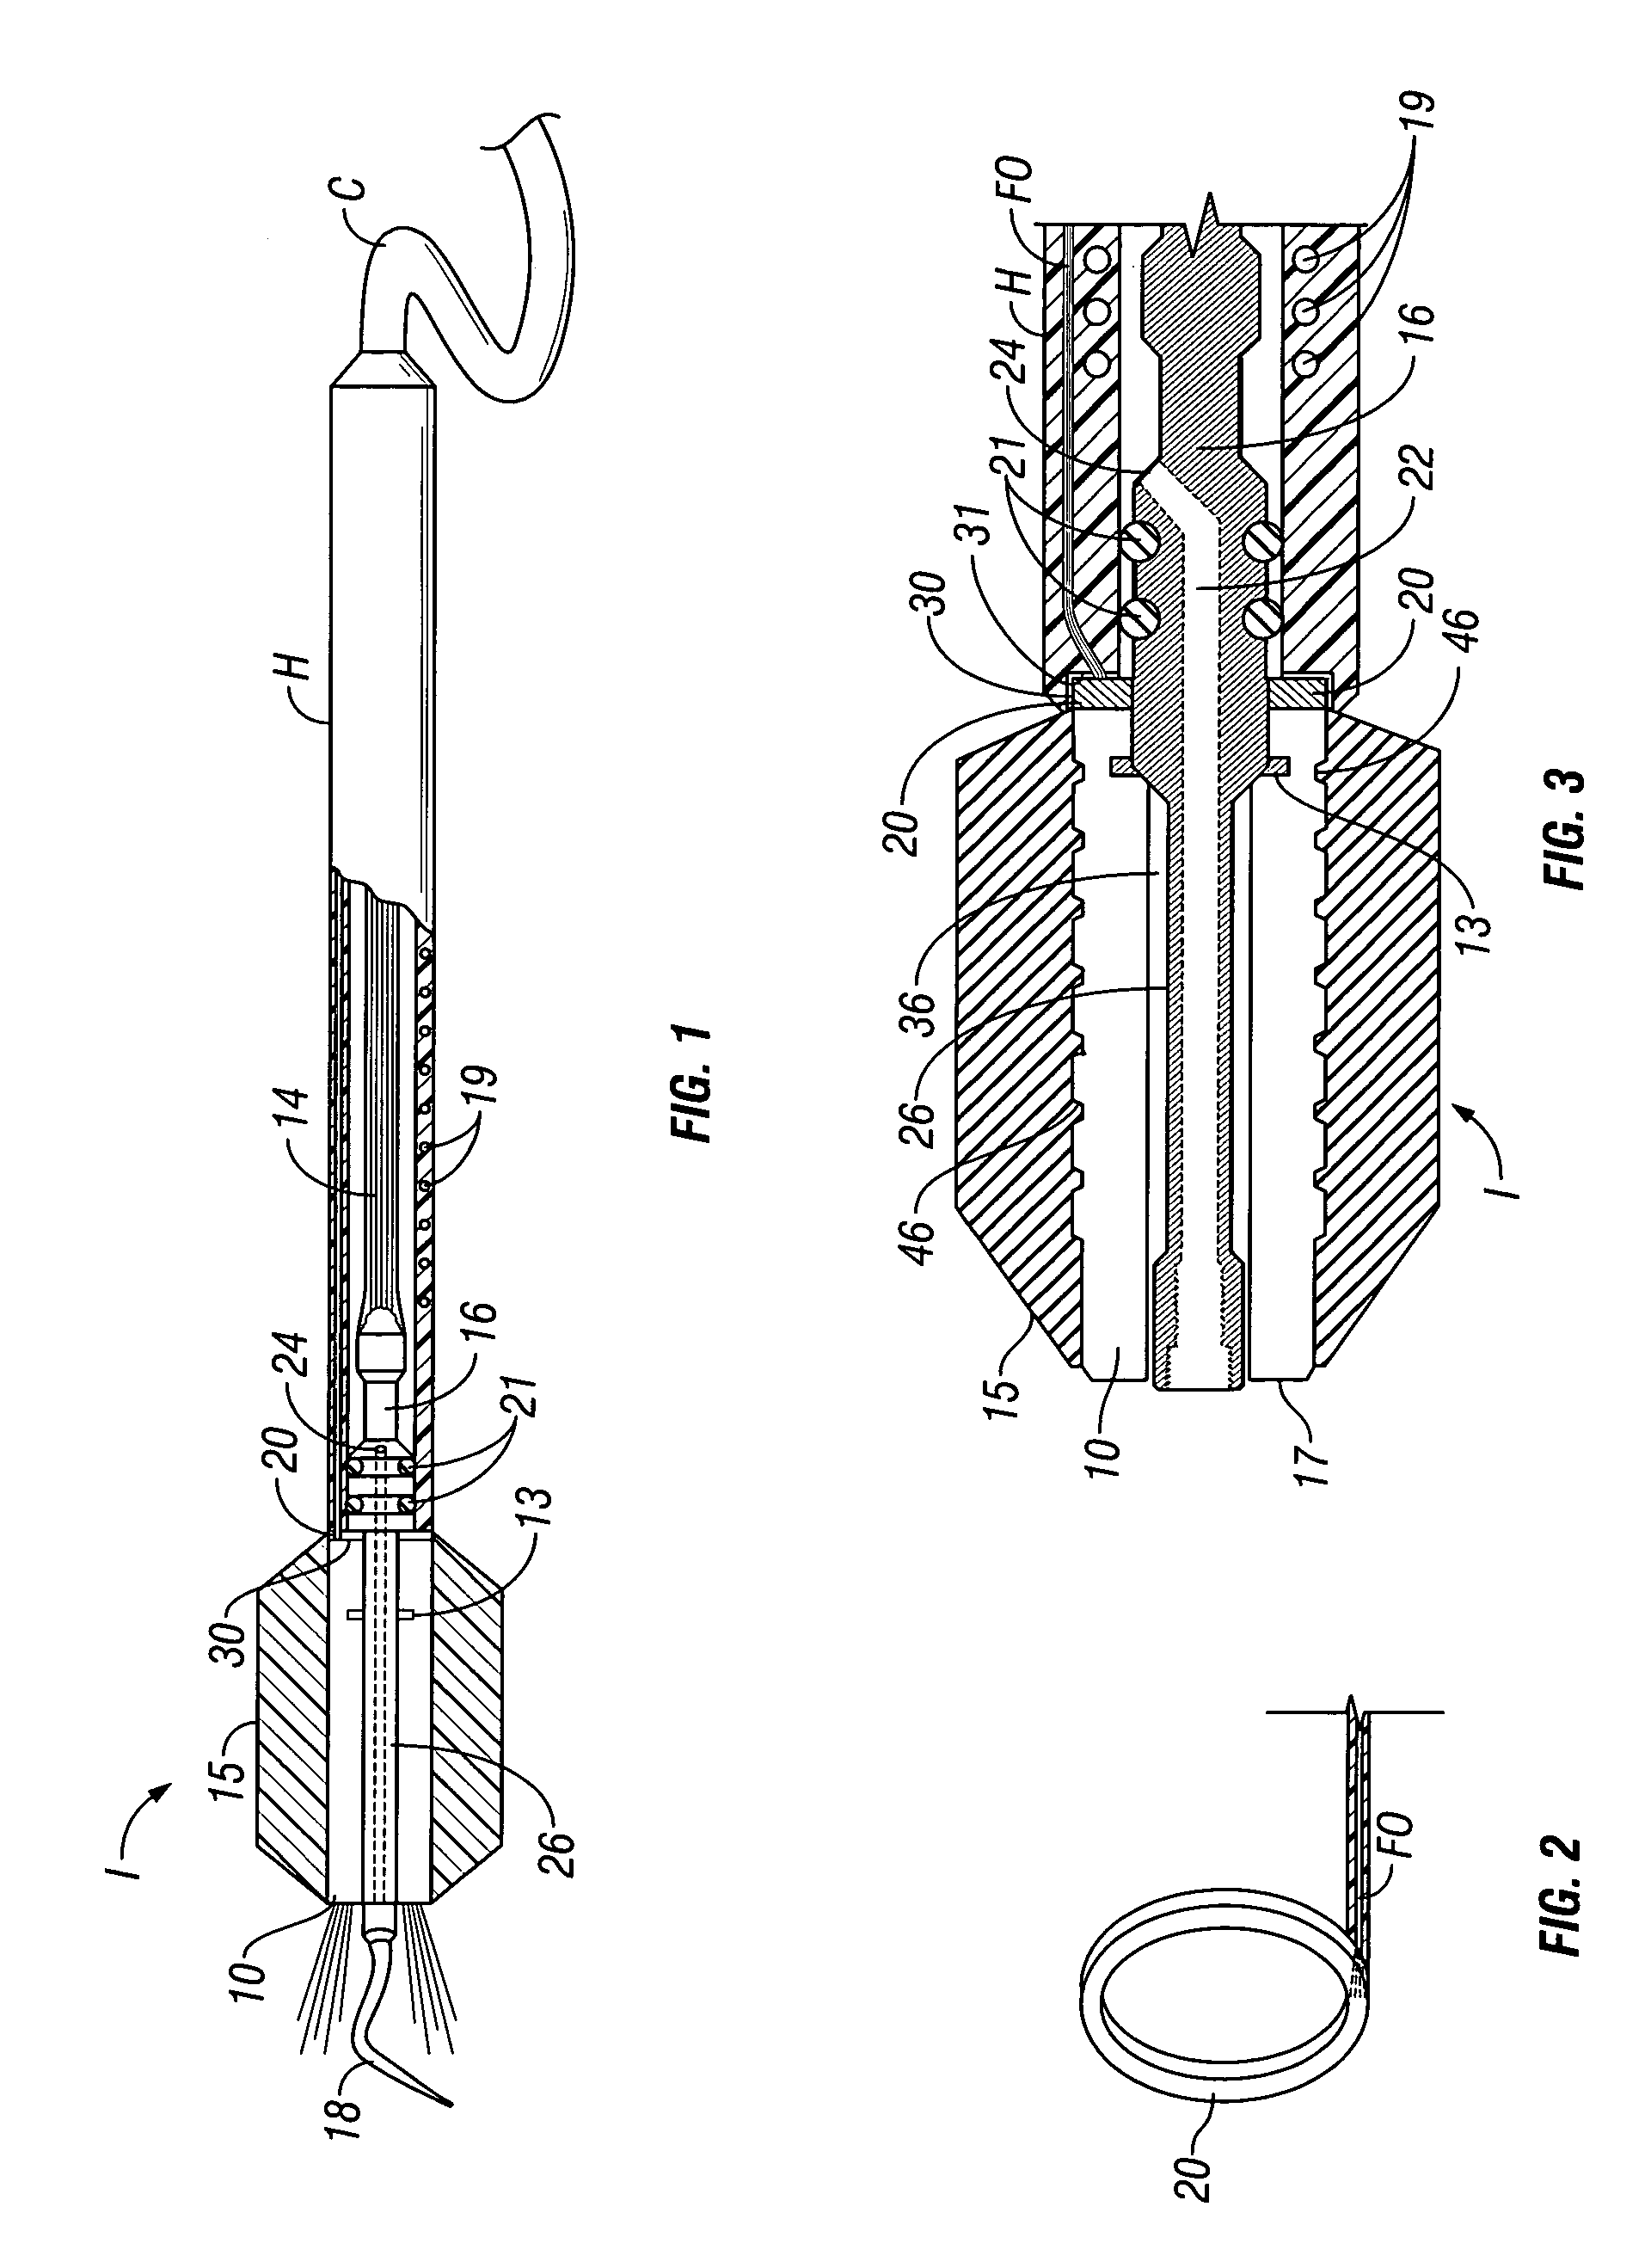 Lighted ultrasonic handpiece and color code grip system